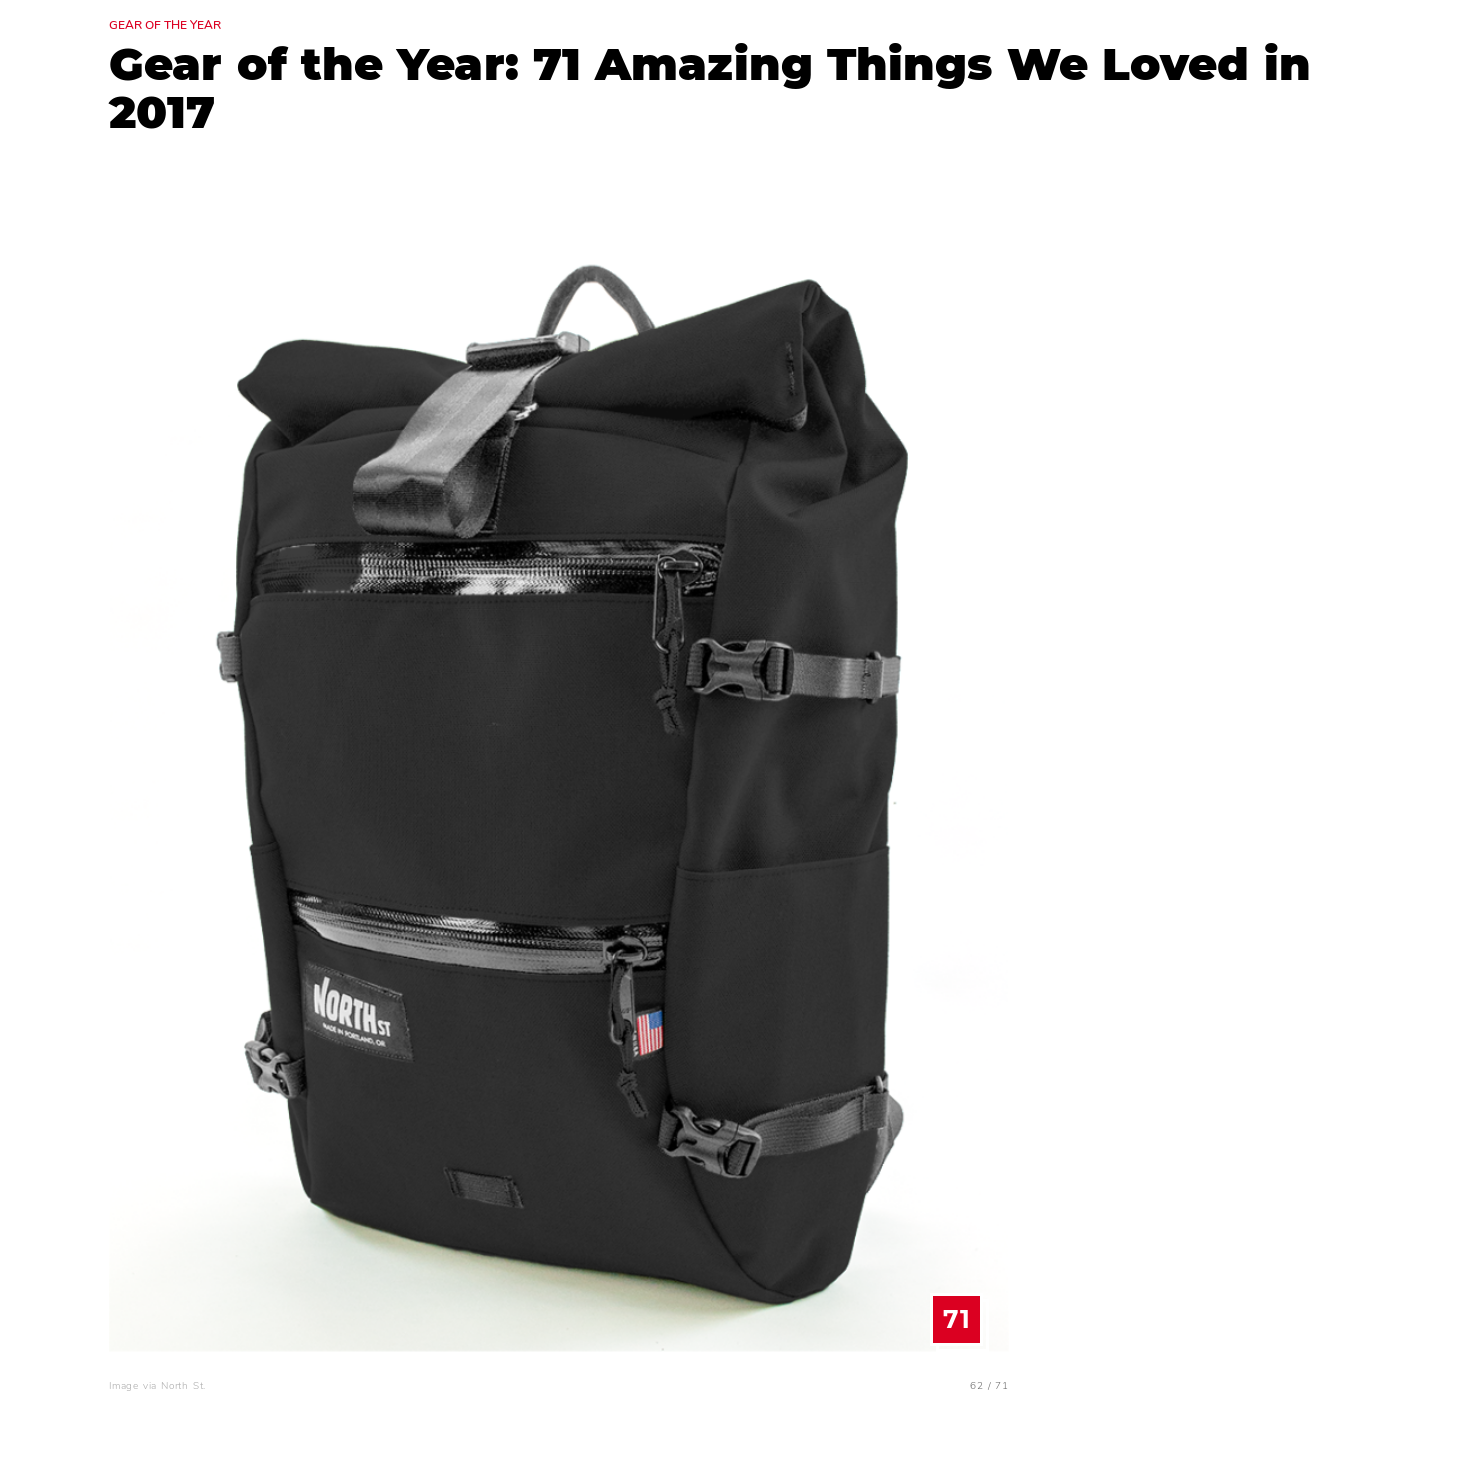 Flanders Backpack featured in Men's Journal Gear of the Year 2017